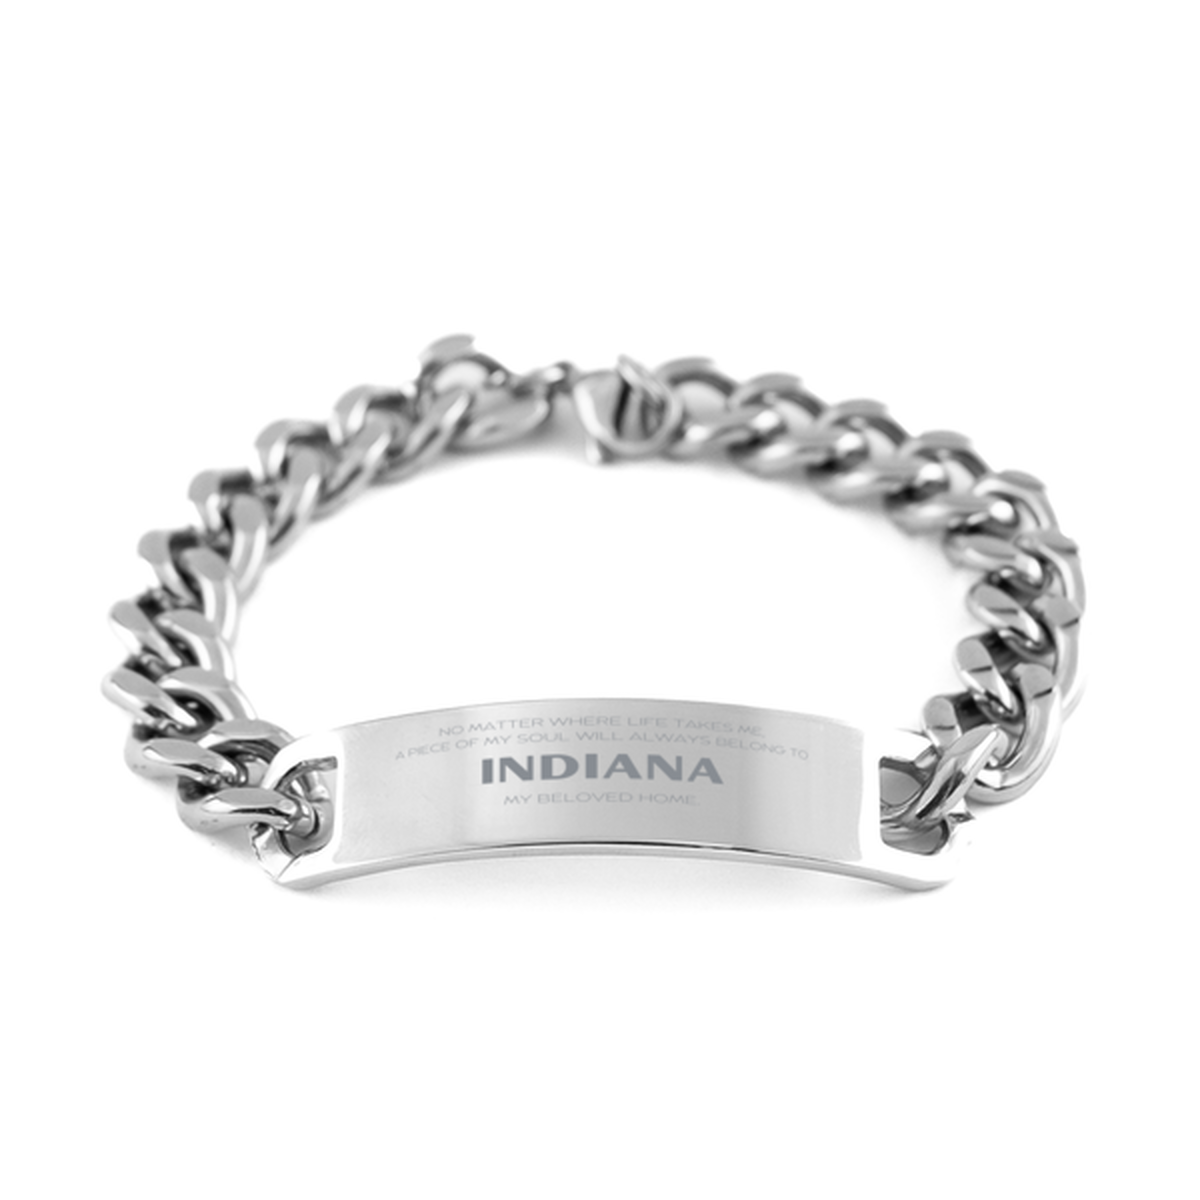 Love Indiana State Gifts, My soul will always belong to Indiana, Proud Cuban Chain Stainless Steel Bracelet, Birthday Unique Gifts For Indiana Men, Women, Friends